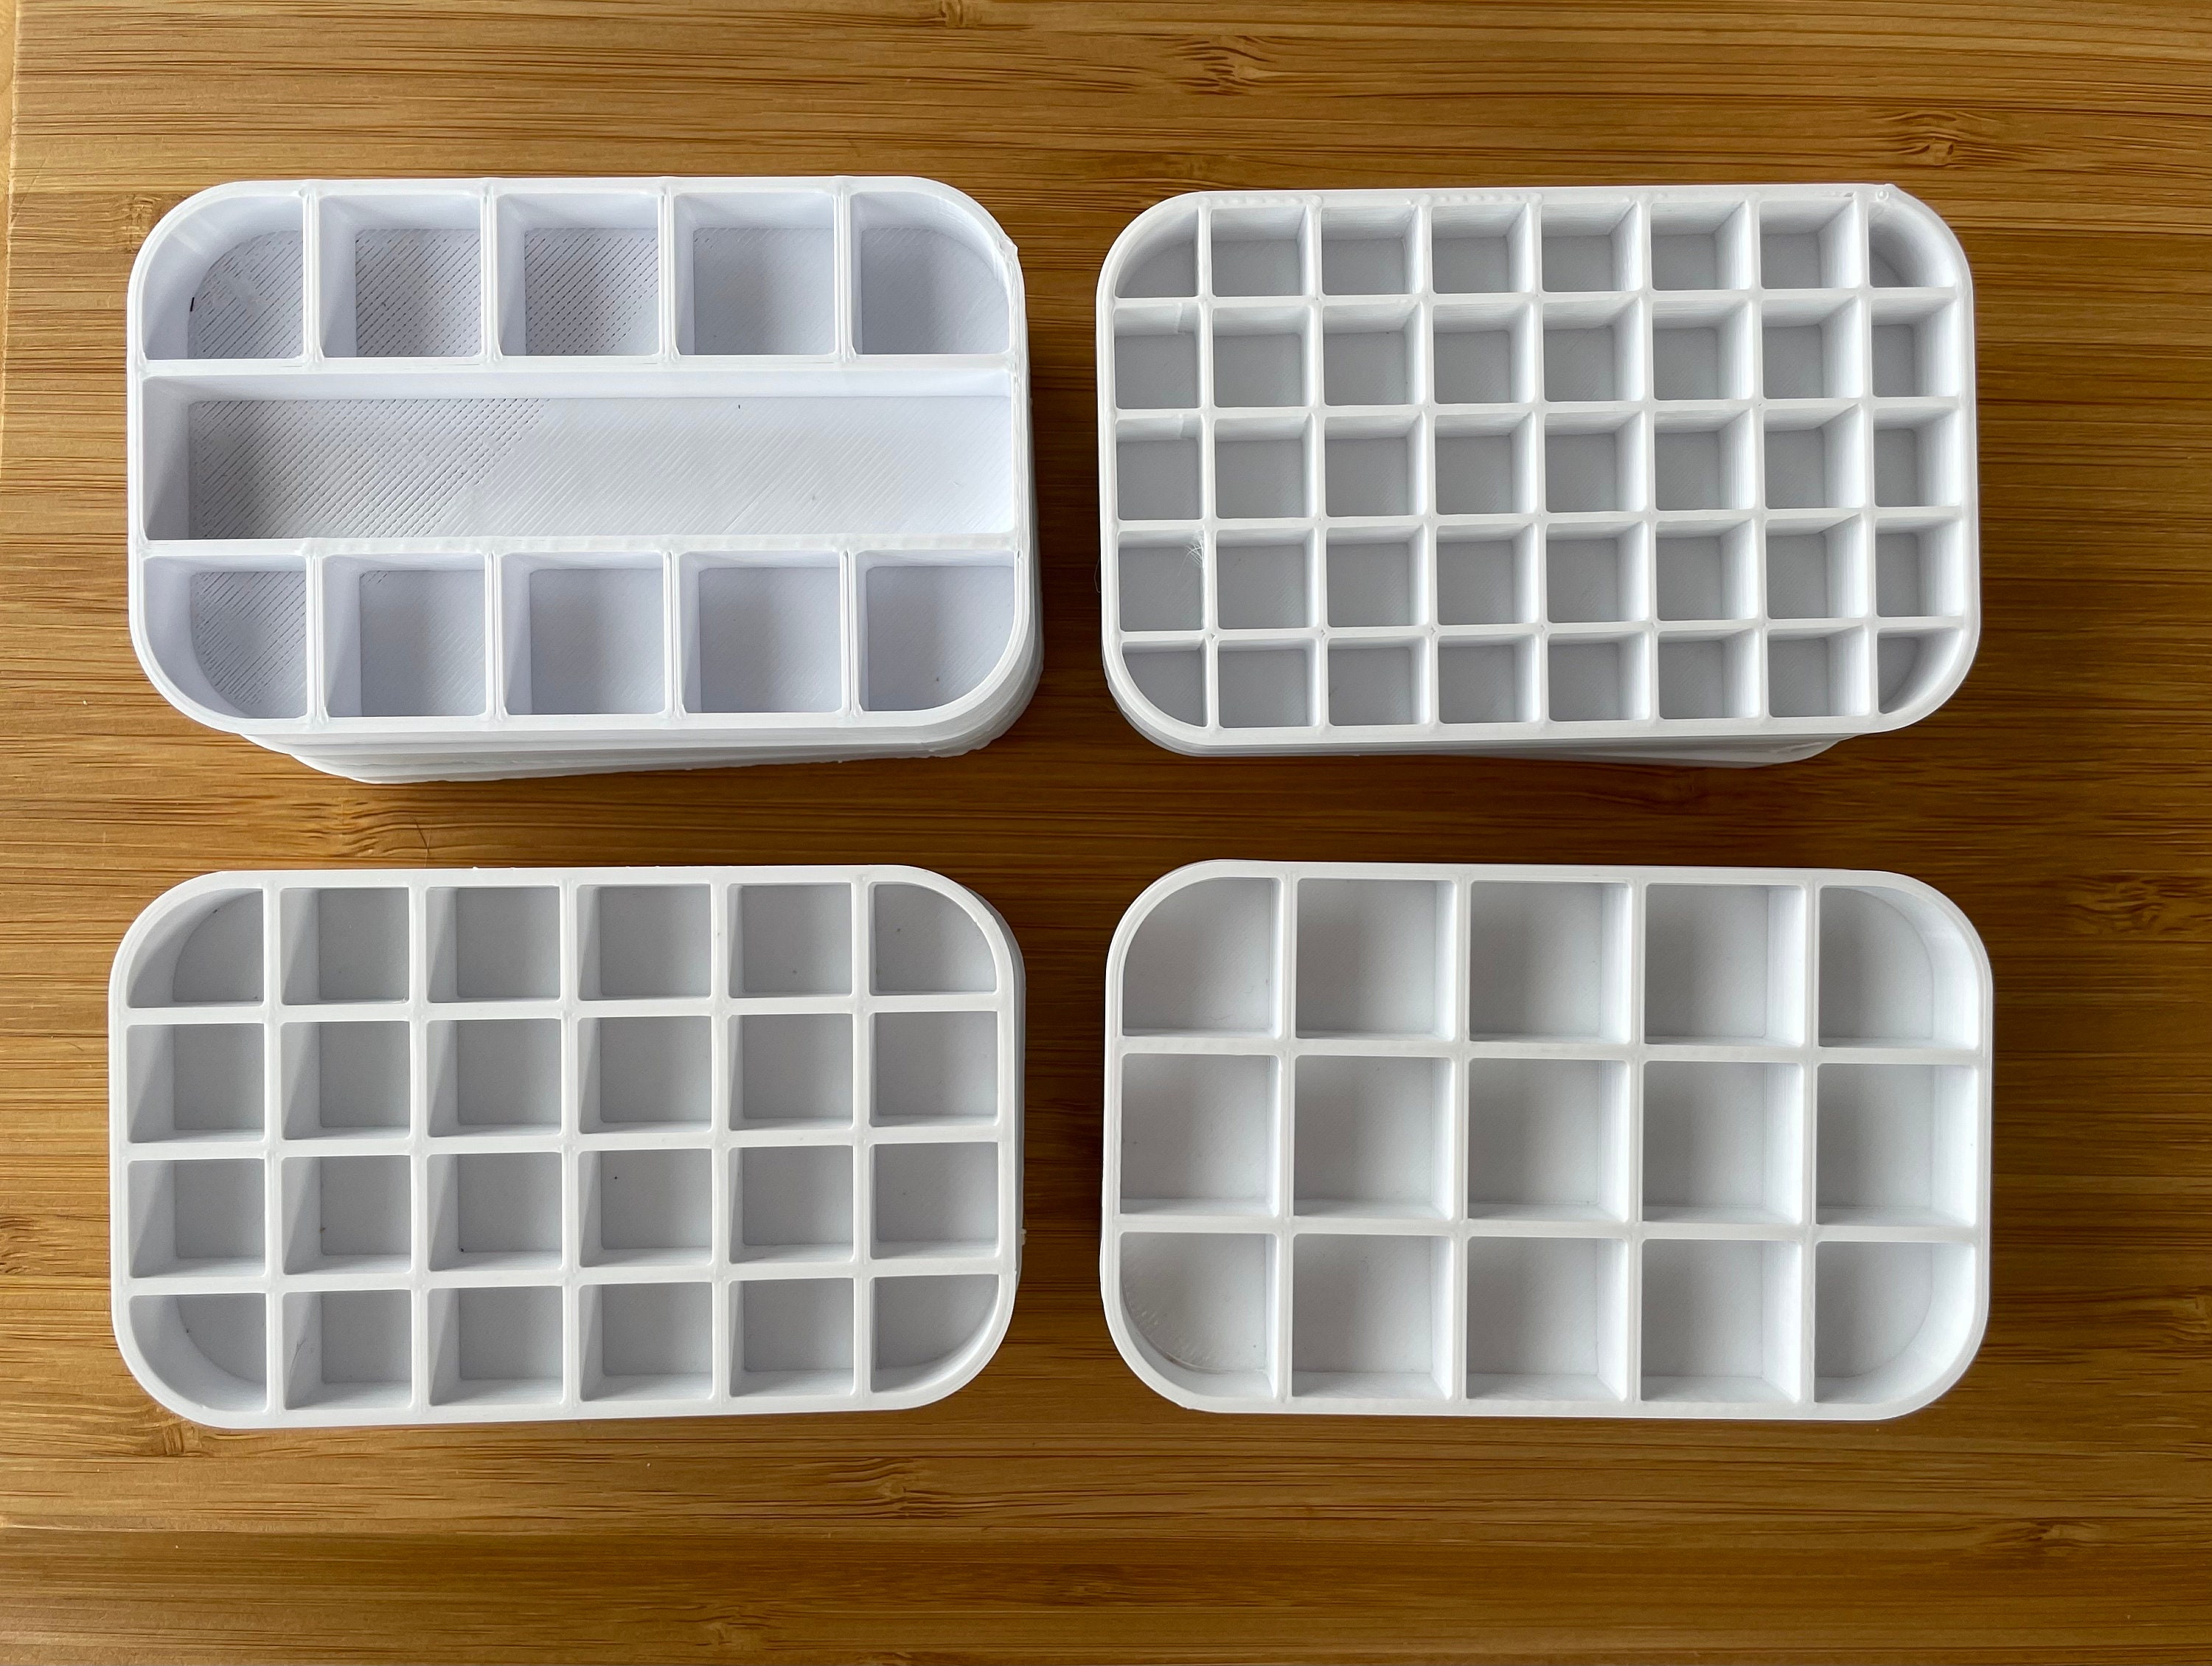 Falcone Ice cube bottle tray White Silicone Ice Cube Tray Price in